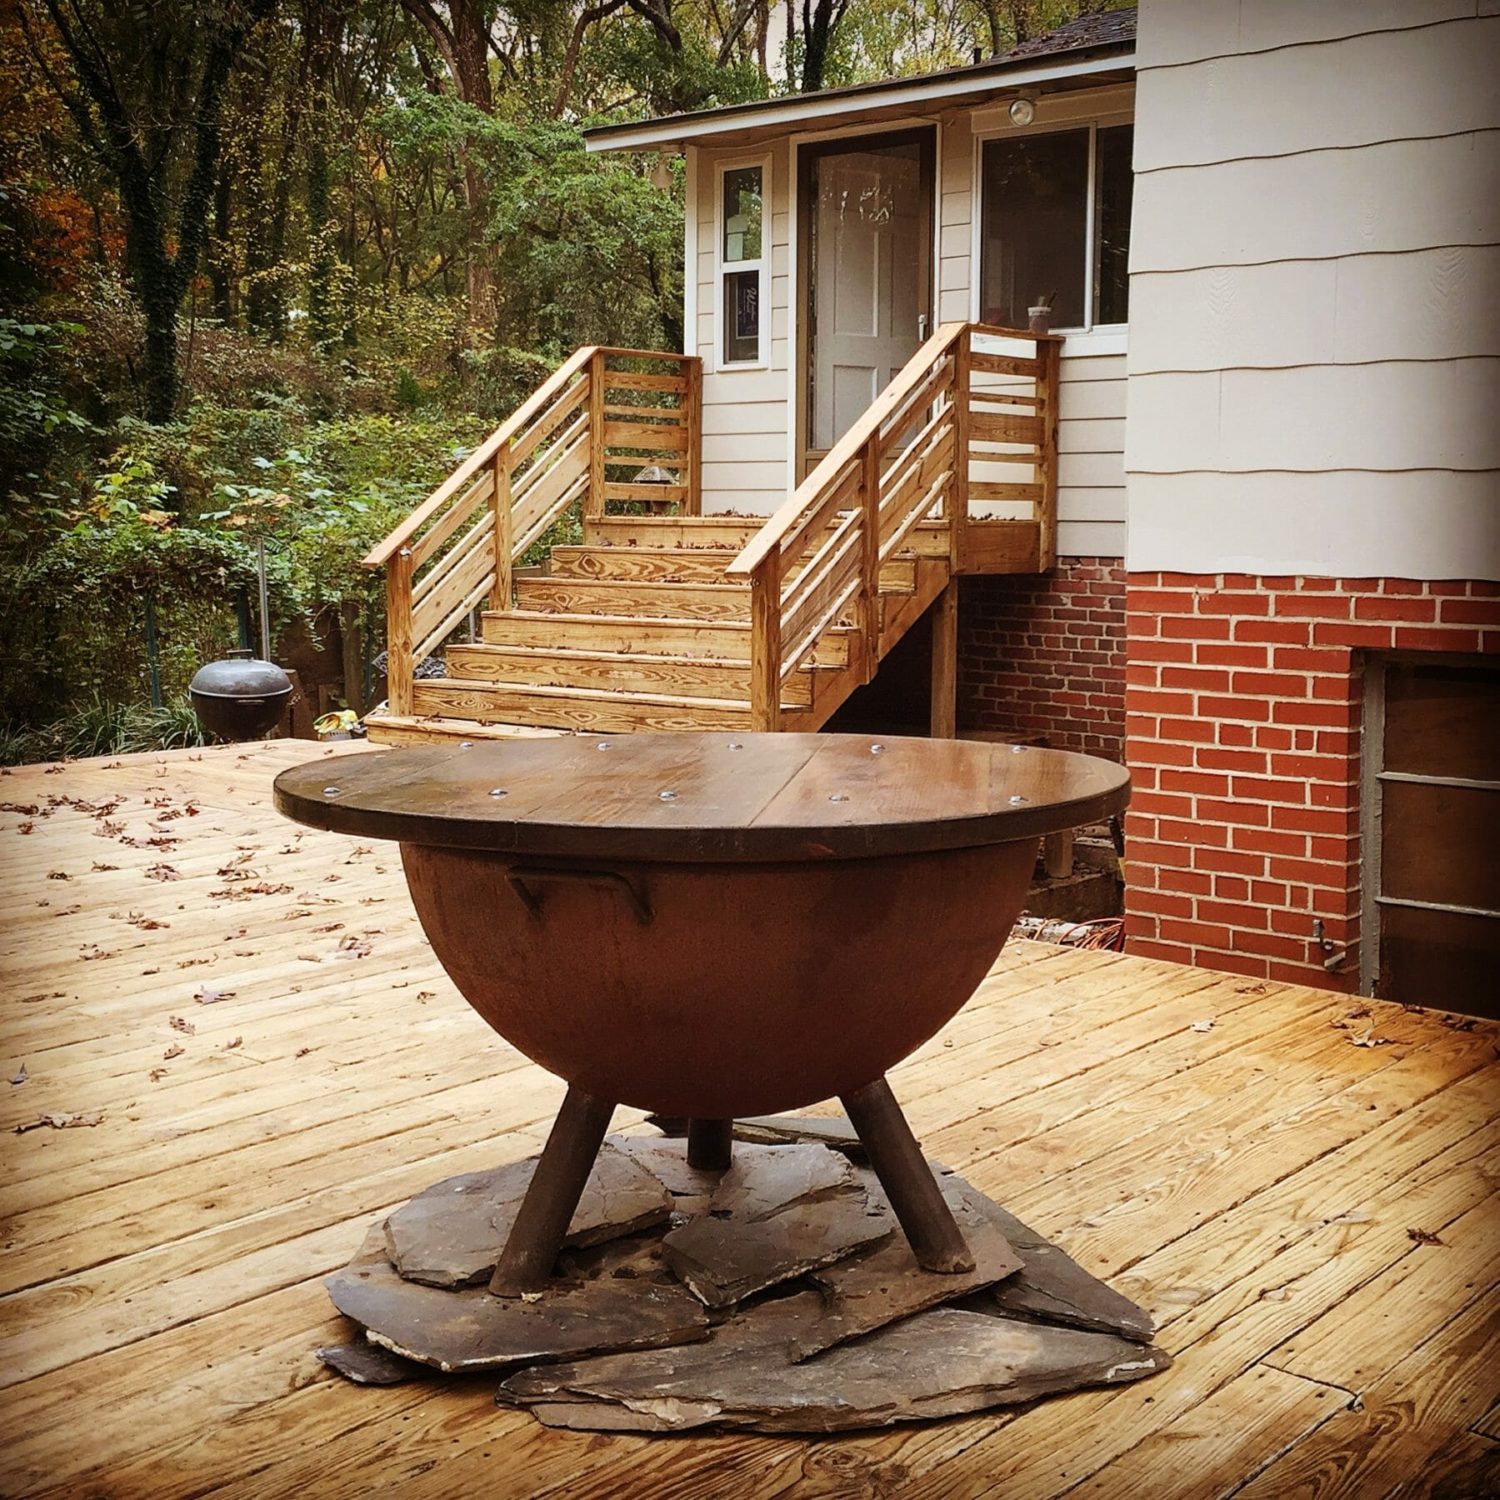 Wooden Decks Fire Pit Safety, Deck With A Fire Pit